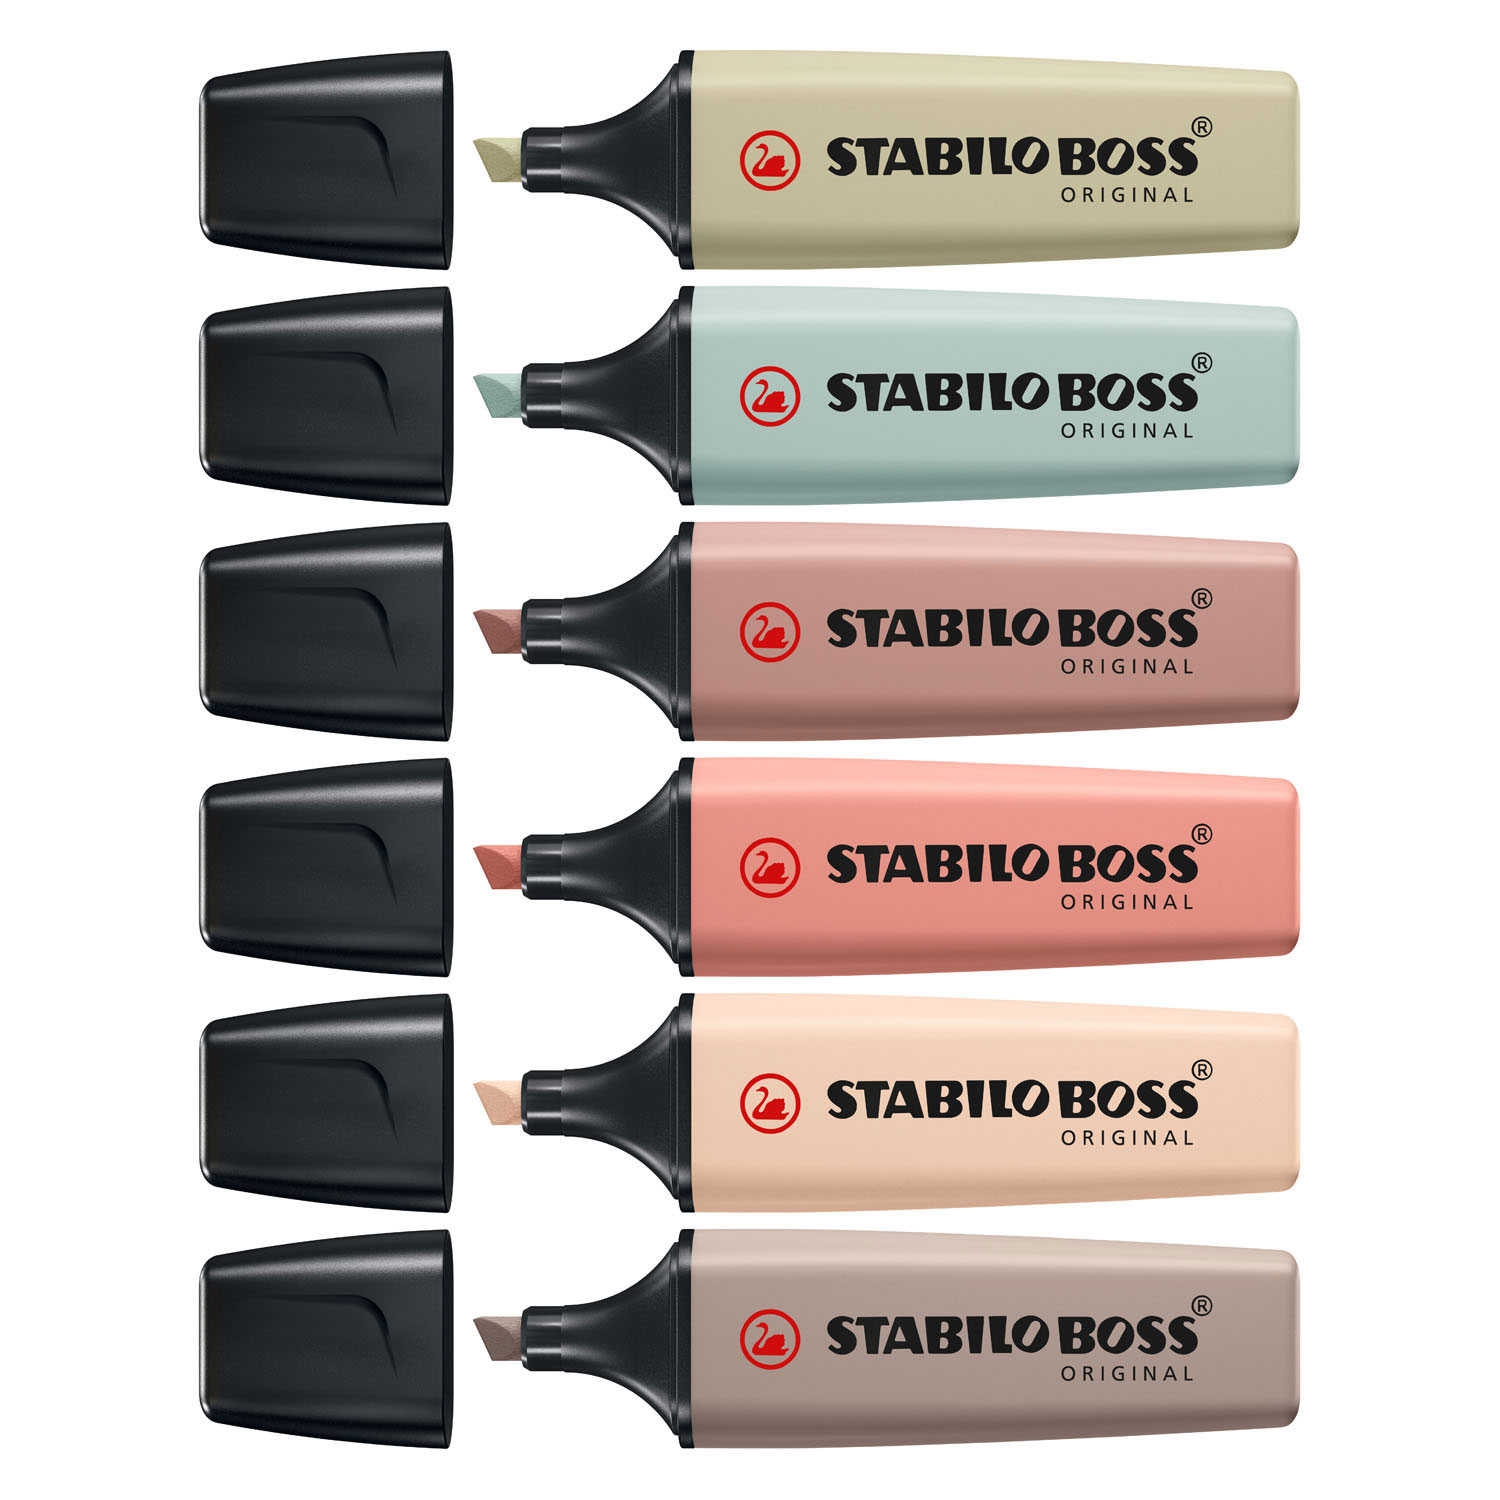 Which of these two colors of our 6 new nature-inspired STABILO BOSS OR